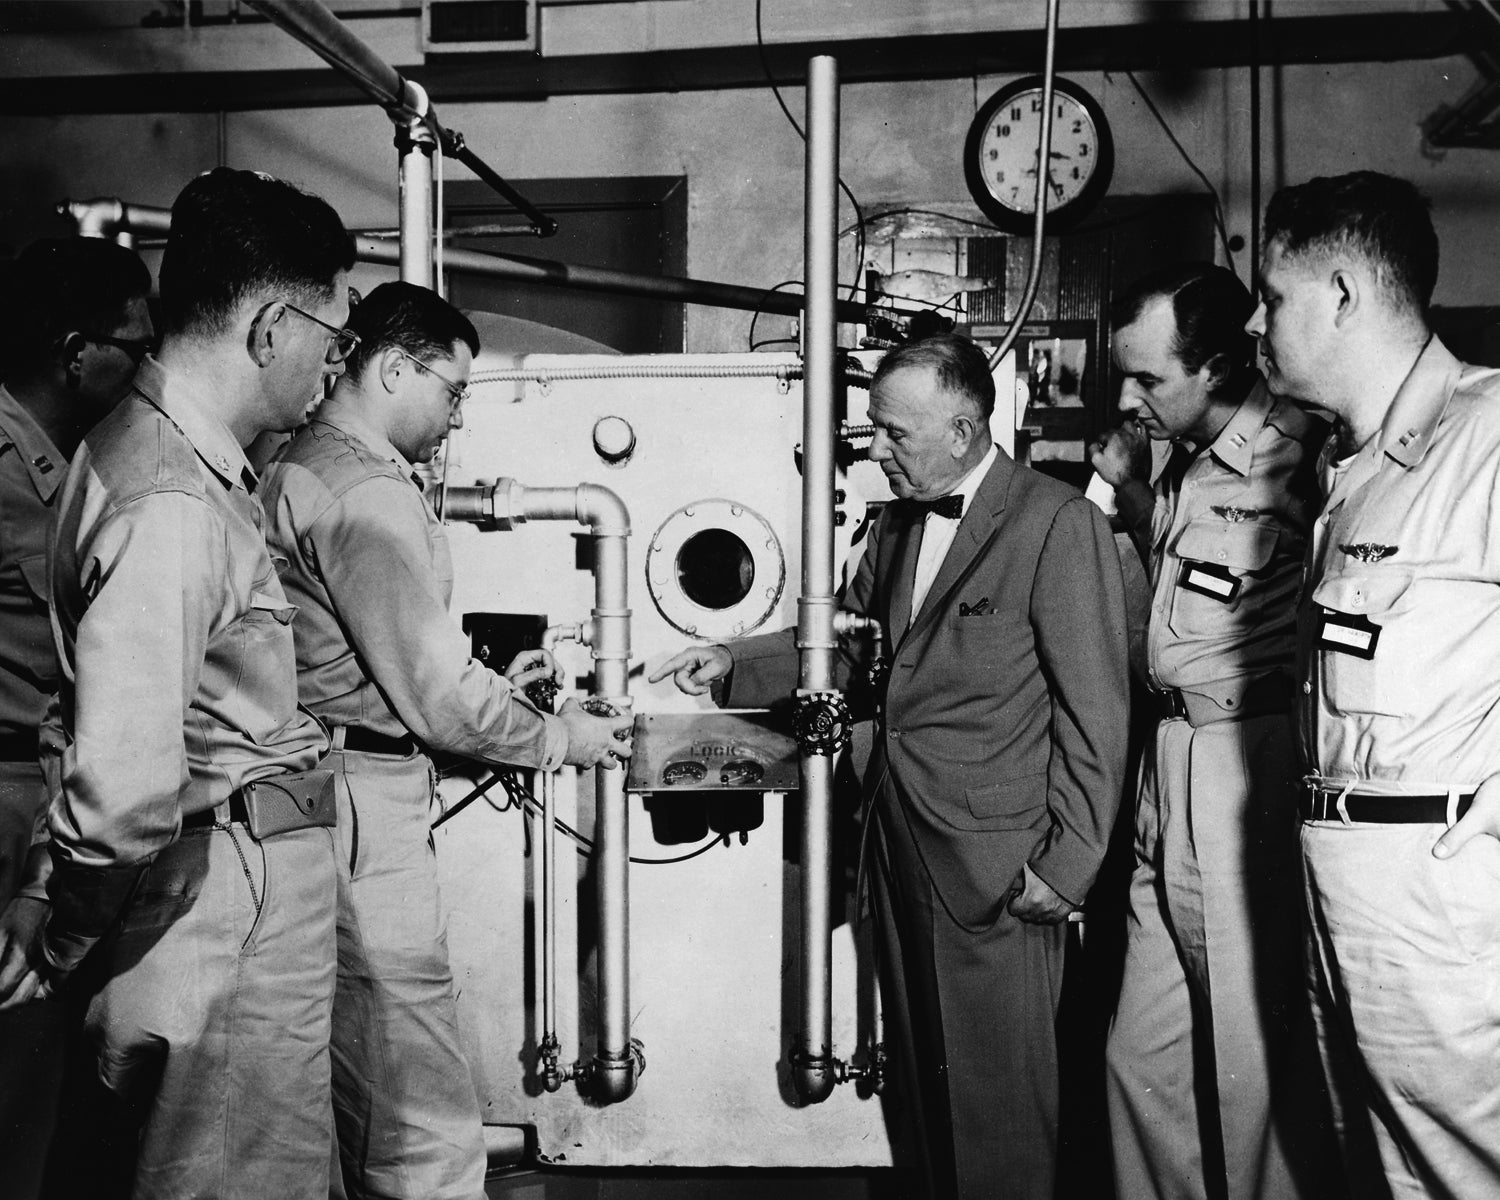 Hubertus Strughold (centre) with a pressurised chamber for use in eventual space medicine research, at the US Air Force School of Aviation Medicine in the 1950s